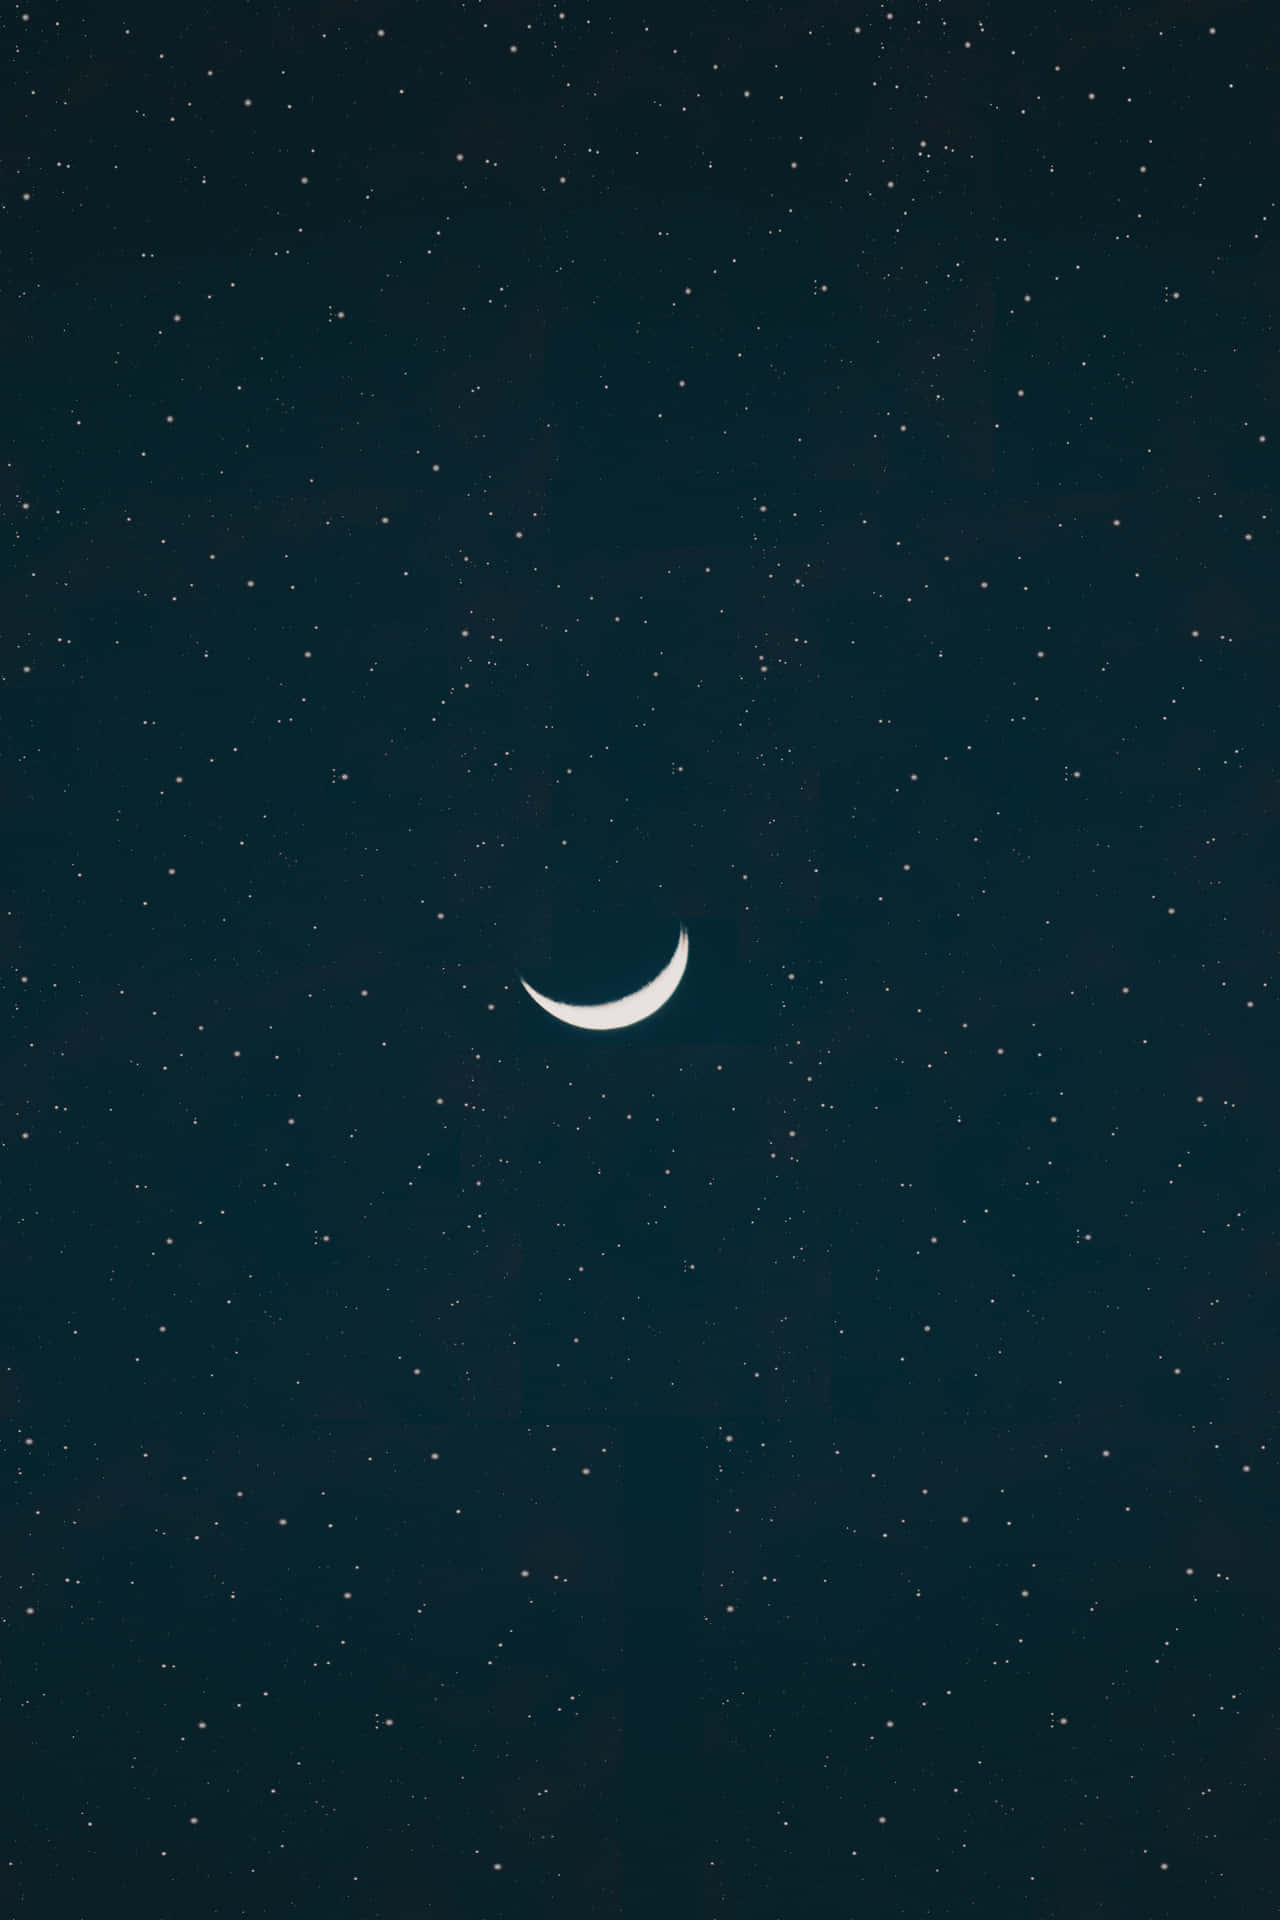 A Crescent In The Sky With Stars Wallpaper